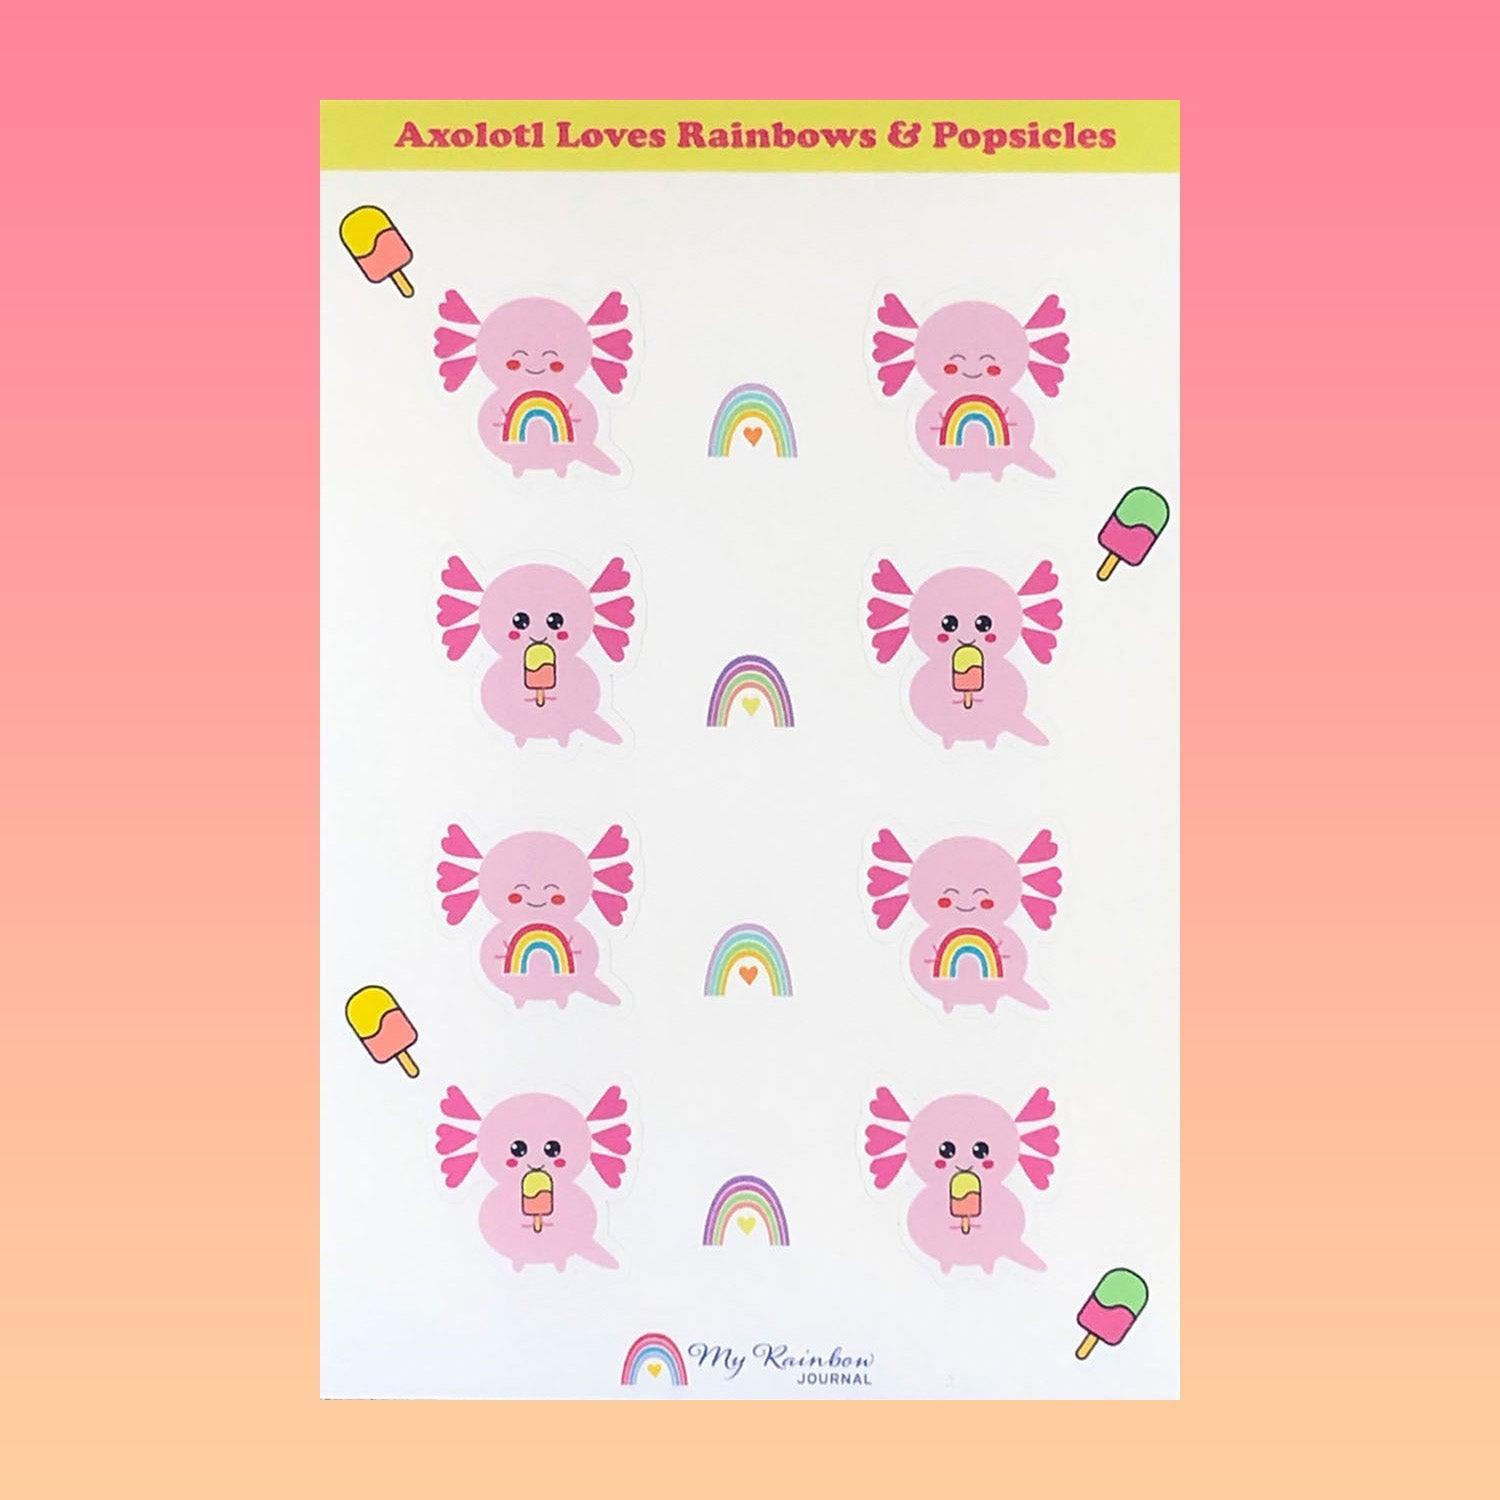 Axolotl Loves Rainbows and Popsicles Sticker Sheet - adorable pink axolotl stickers holding rainbows and eating popsicles